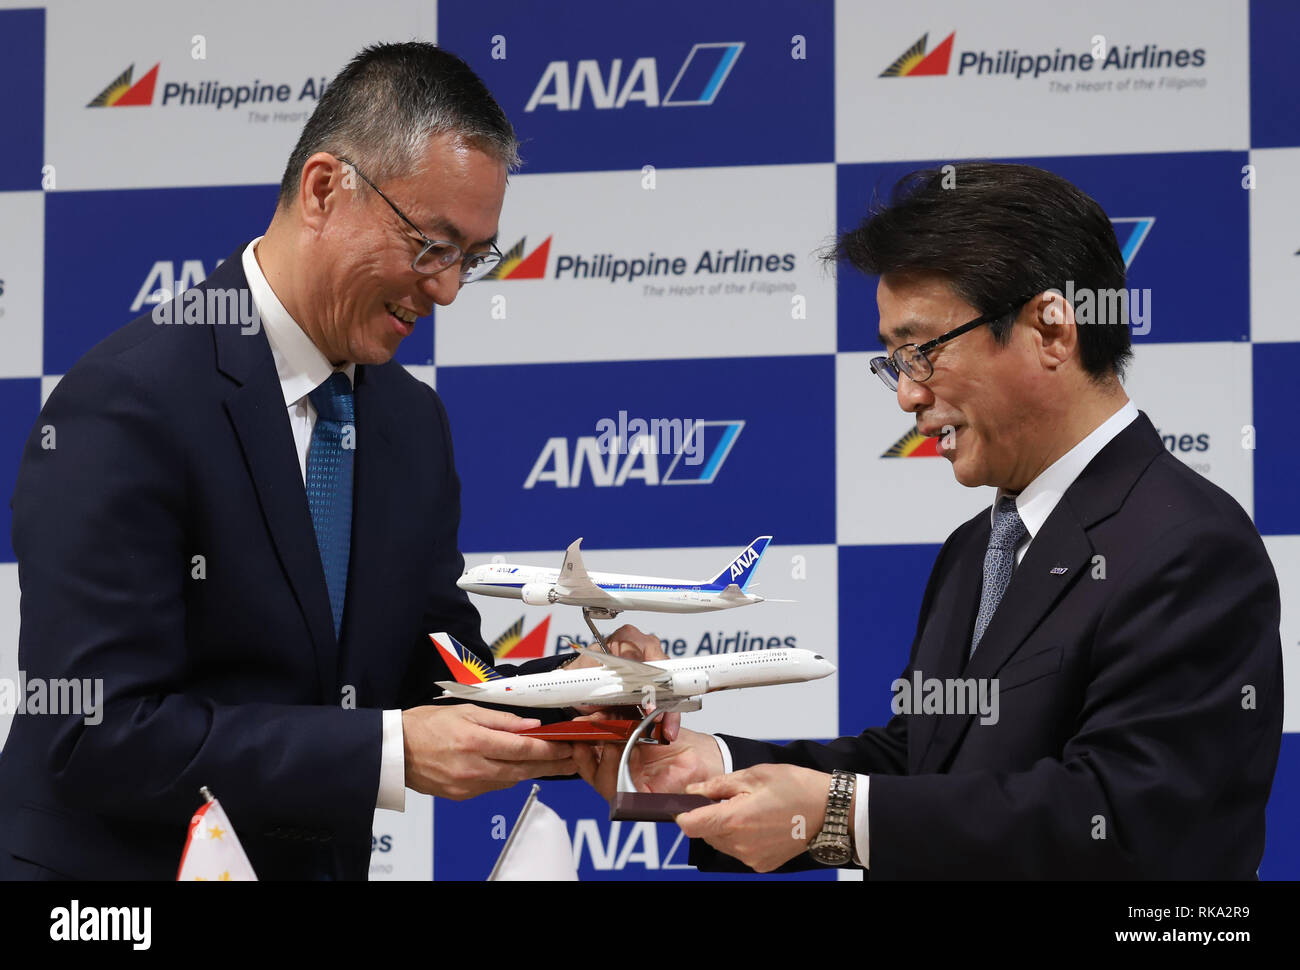 Tokyo, Japan. 8th Feb, 2019. LT Group president and PAL Holdings director Michael Tan (L) and ANA Holdings president Shinya Katanozaka exchange their model planes as they announce the companies expand their partnerships in Tokyo on Friday, February 8, 2019. ANA Holdings will invest 95 million U.S. dollars to PAL Holdings and acquire 9.5 percent of PAL Holdings shares. Credit: Yoshio Tsunoda/AFLO/Alamy Live News Stock Photo